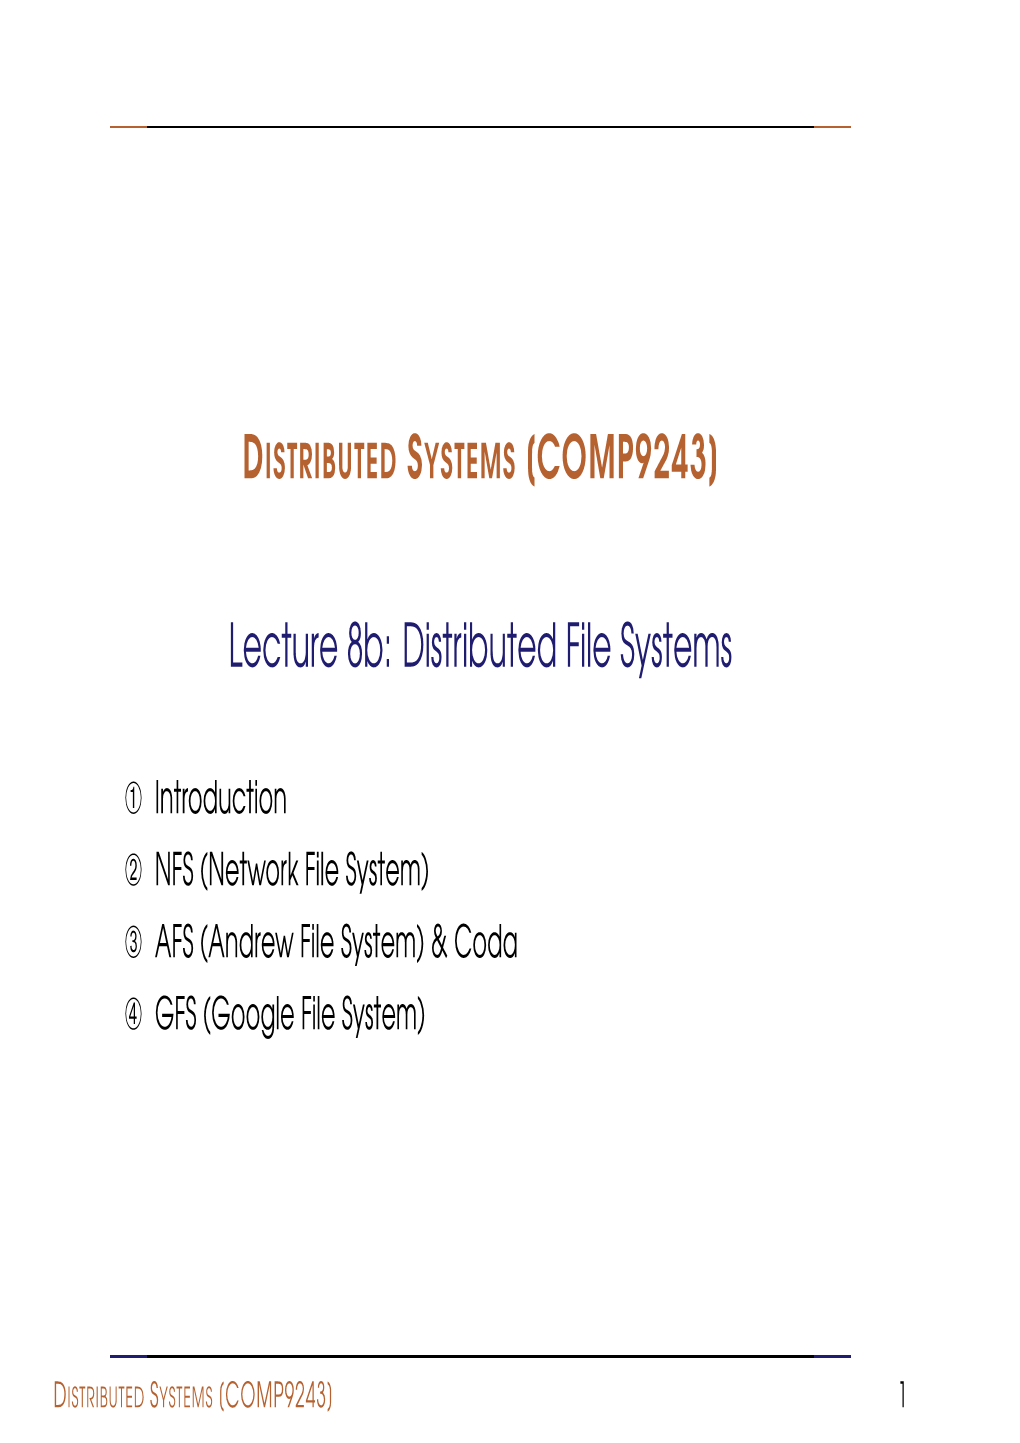 Lecture 8B: Distributed File Systems